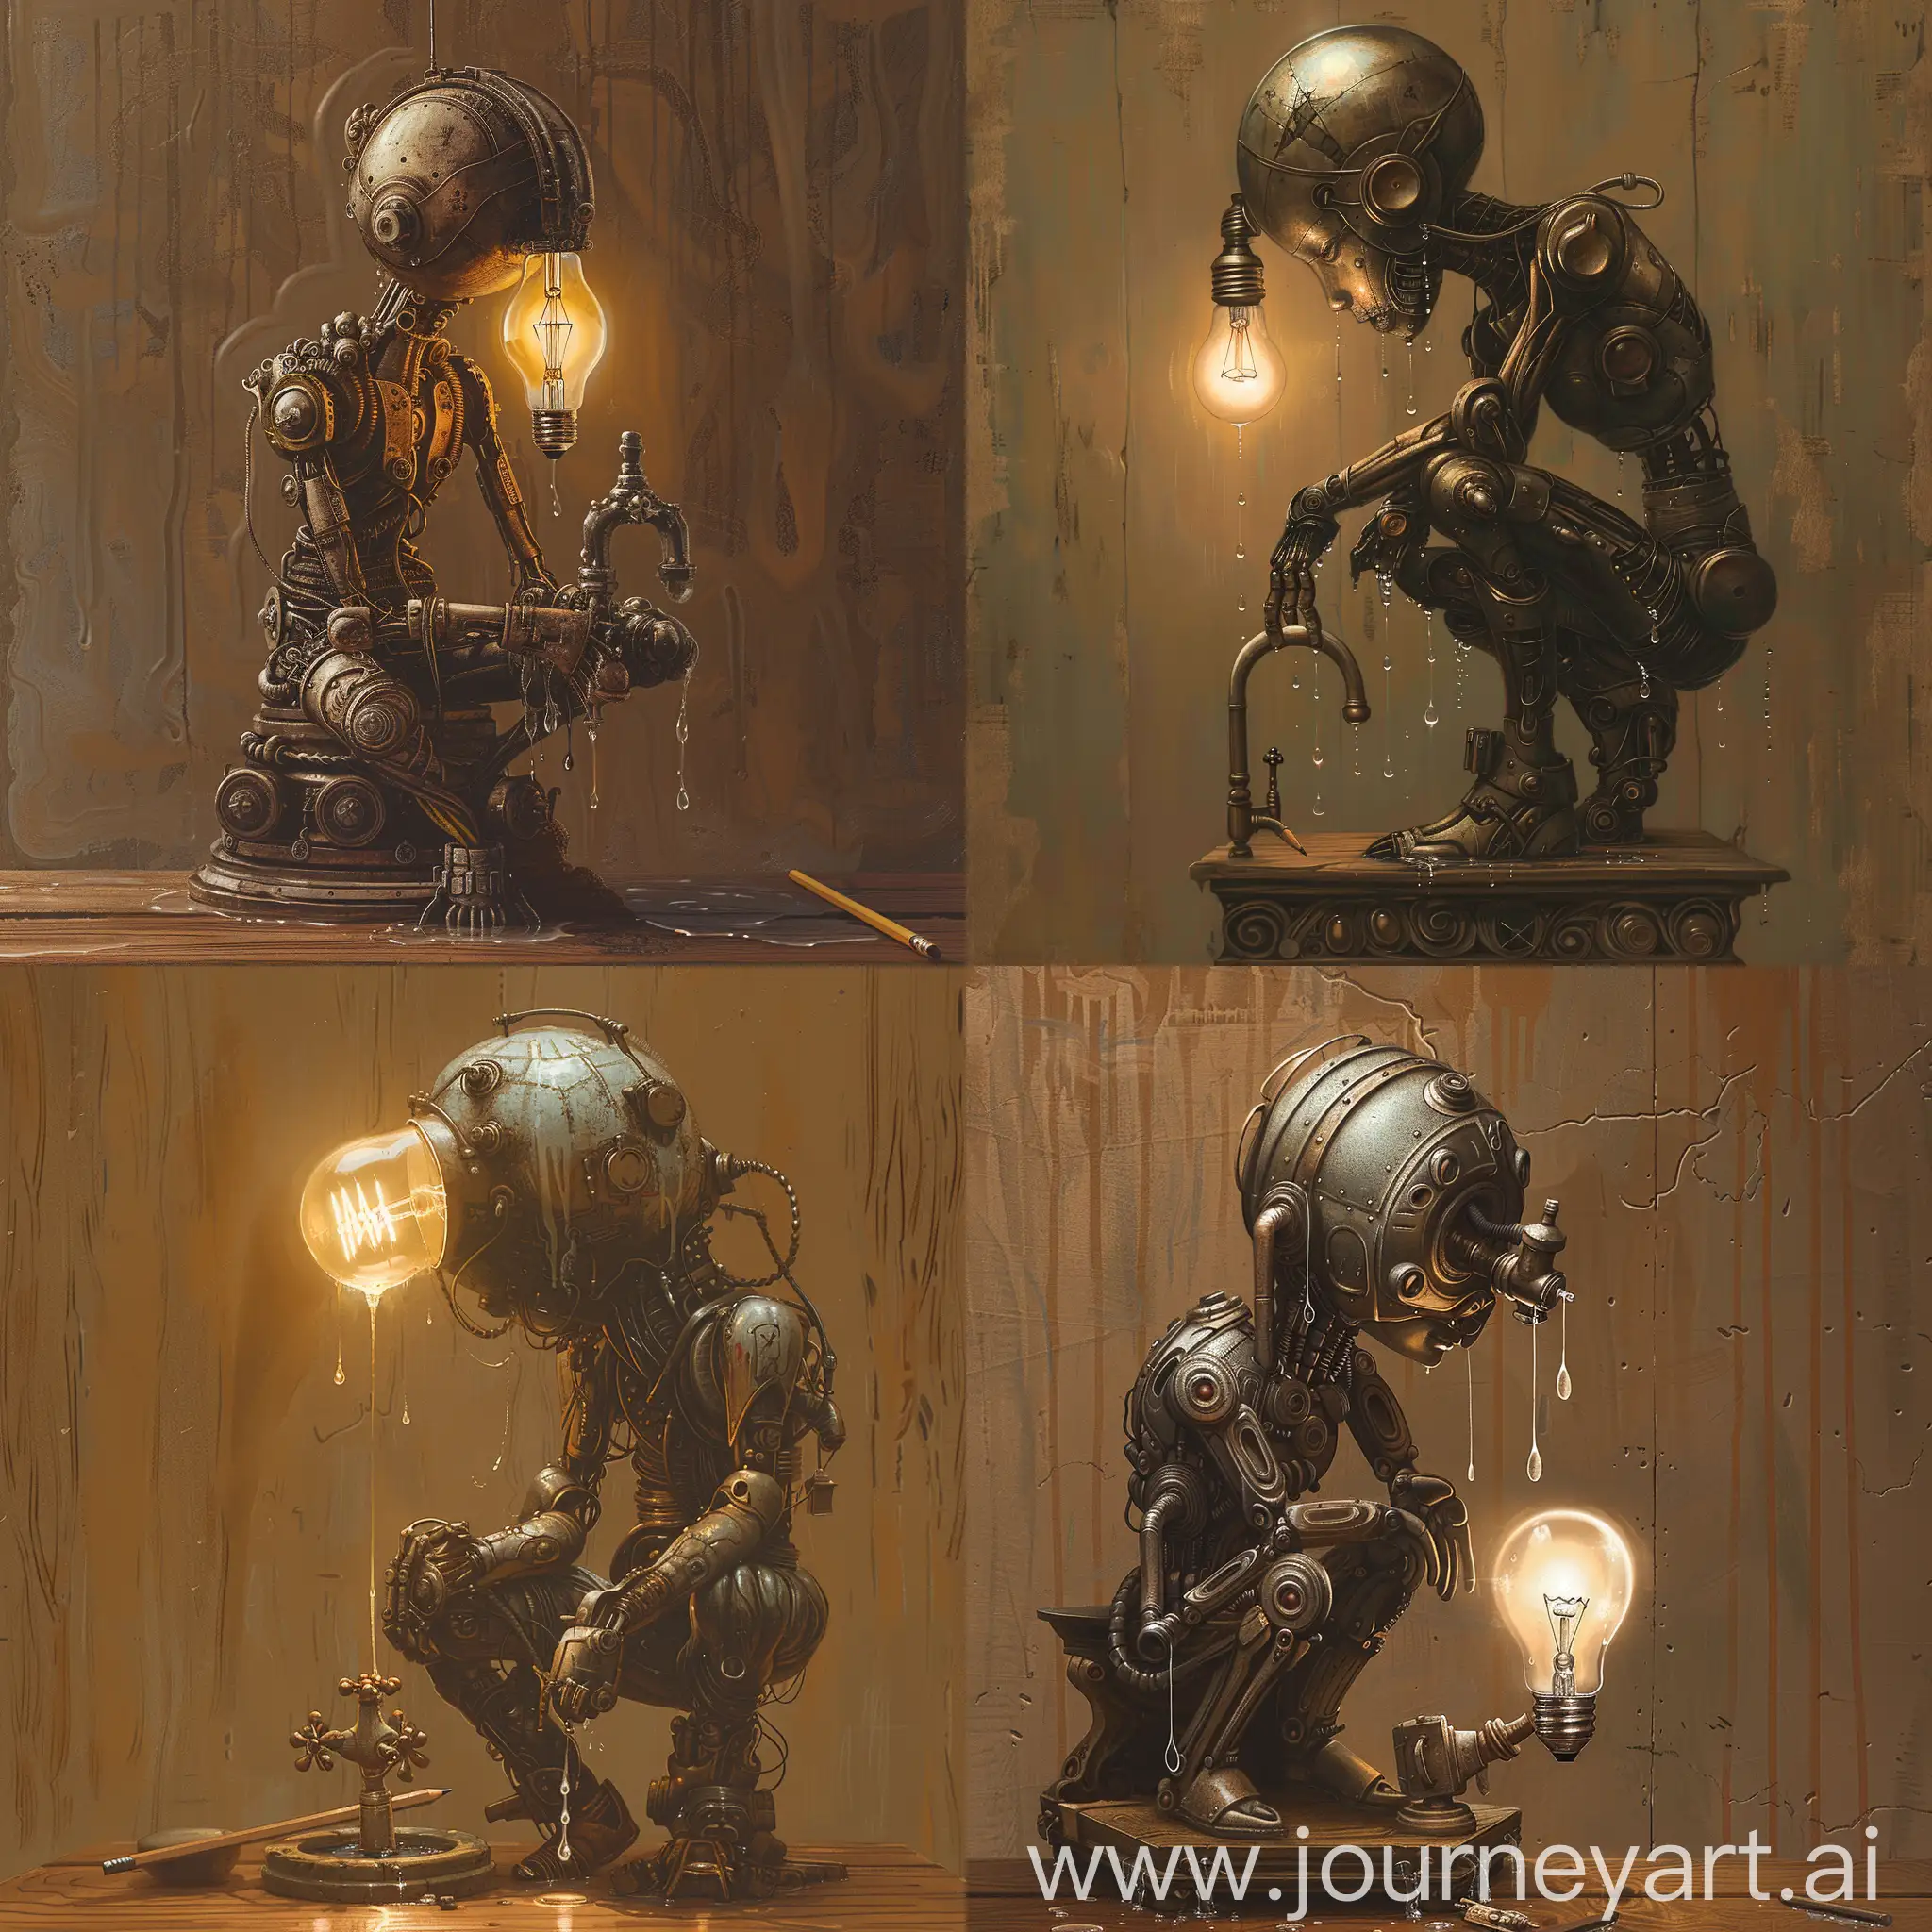 Enigmatic-Metallic-Figure-with-Illuminated-Bulb-Head-and-Vintage-Adornments